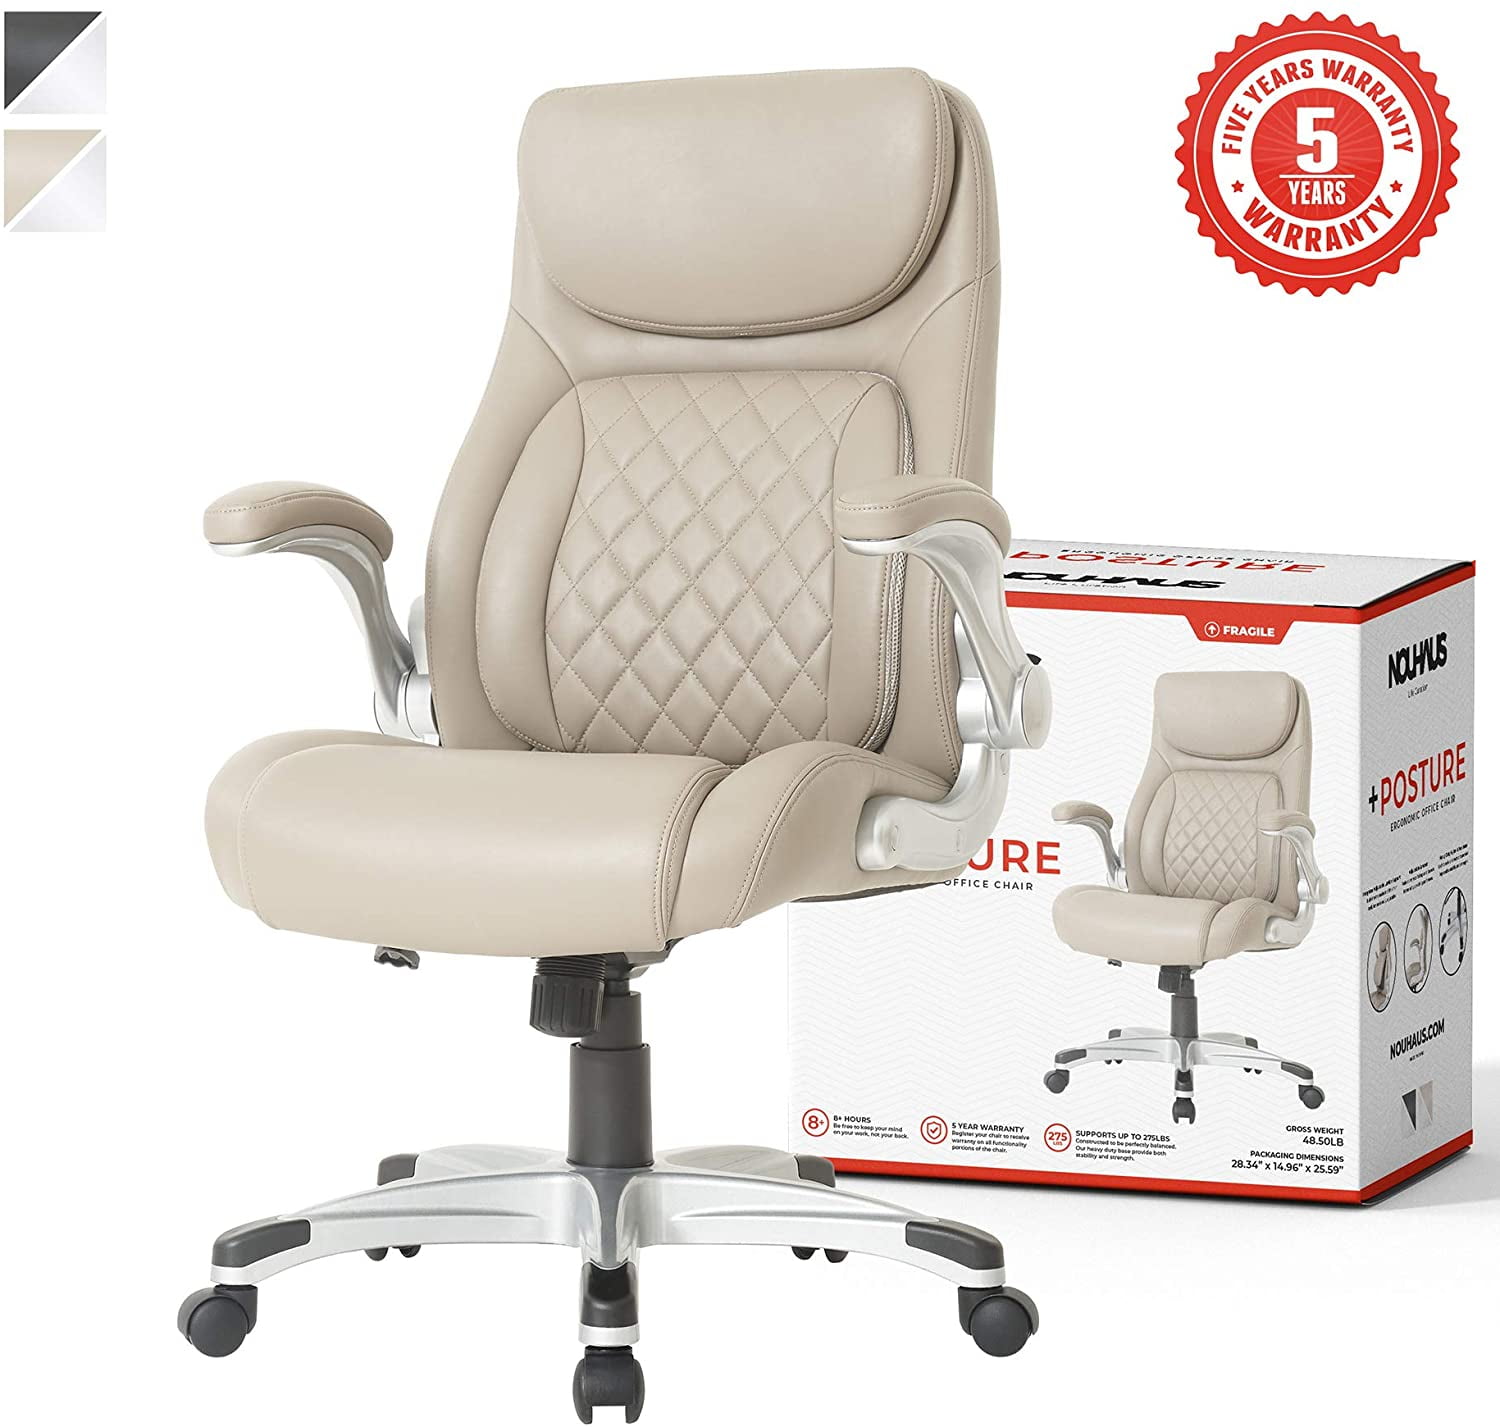 Modern Executive Chair and Computer Desk Chair Taupe Click5 Lumbar Support with FlipAdjust Armrests NOUHAUS +Posture Ergonomic PU Leather Office Chair 